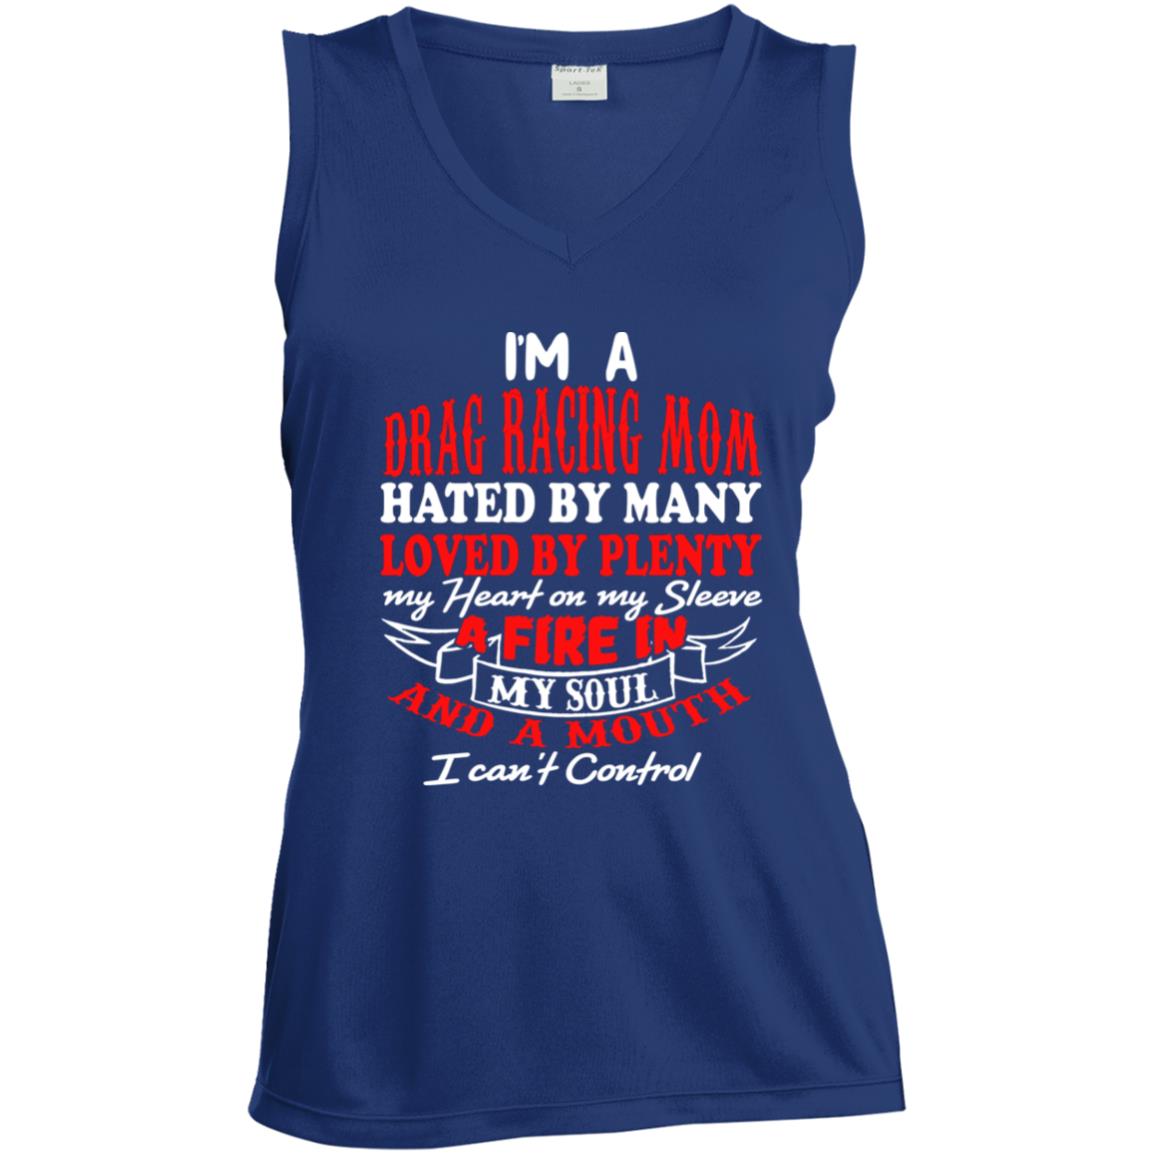 I'm A Drag Racing Mom Hated By Many Loved By Plenty Ladies' Sleeveless V-Neck Performance Tee